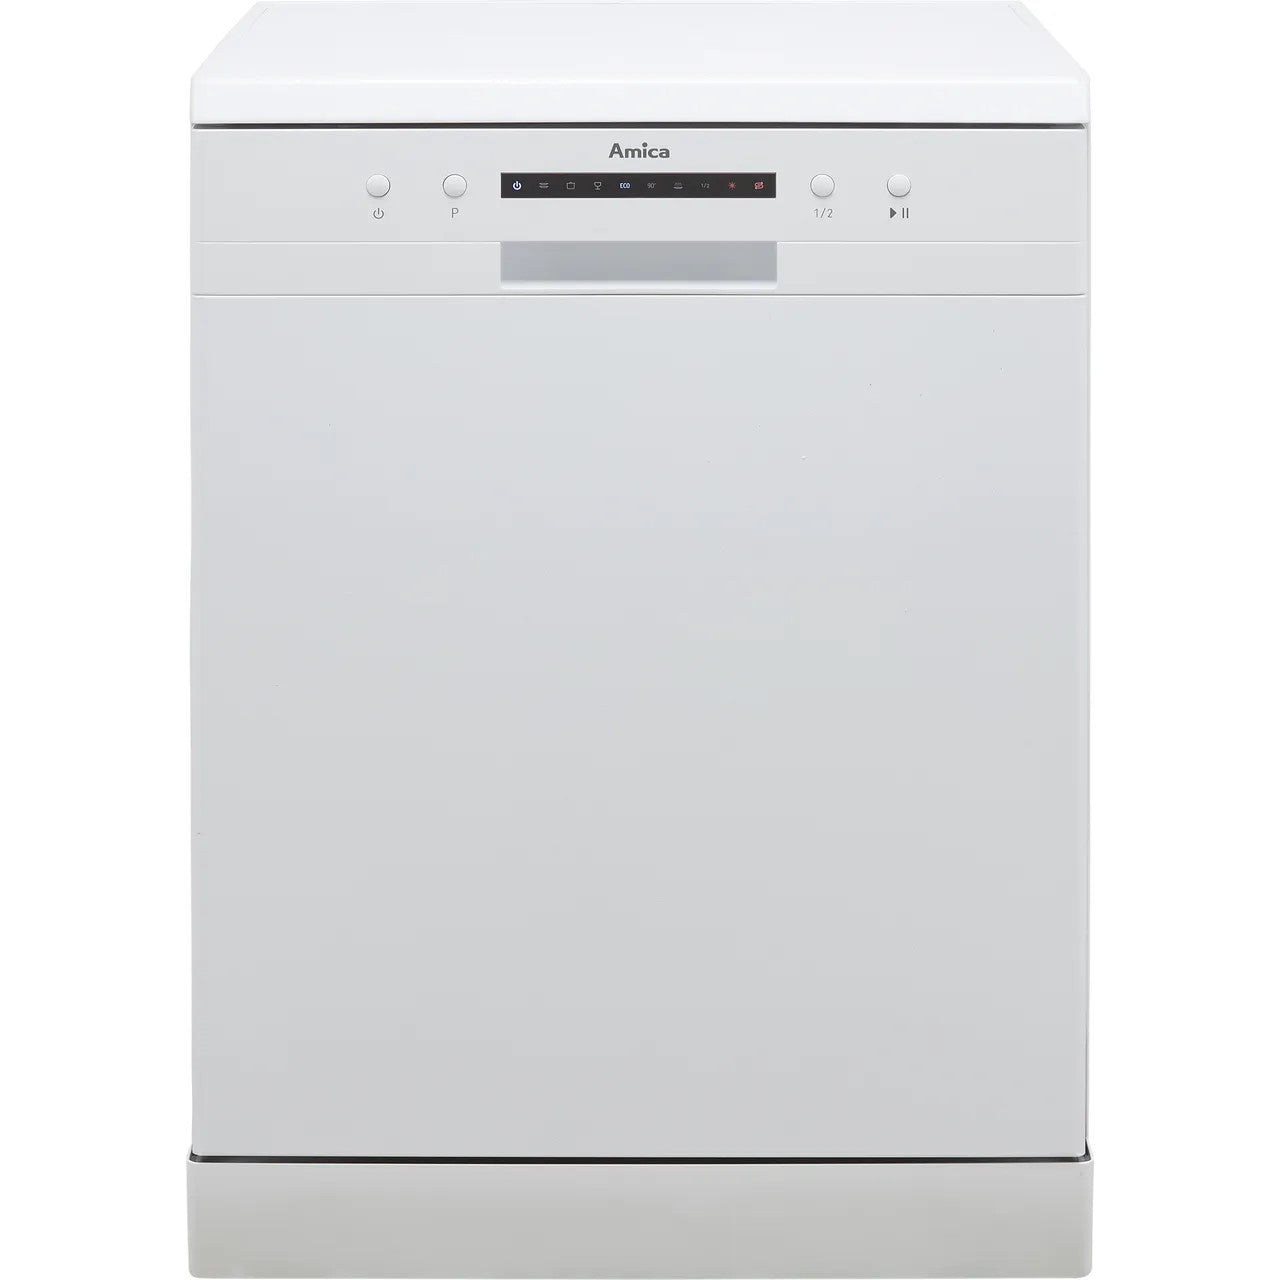 Amica ADF610WH Freestanding 13 Place Settings Dishwasher